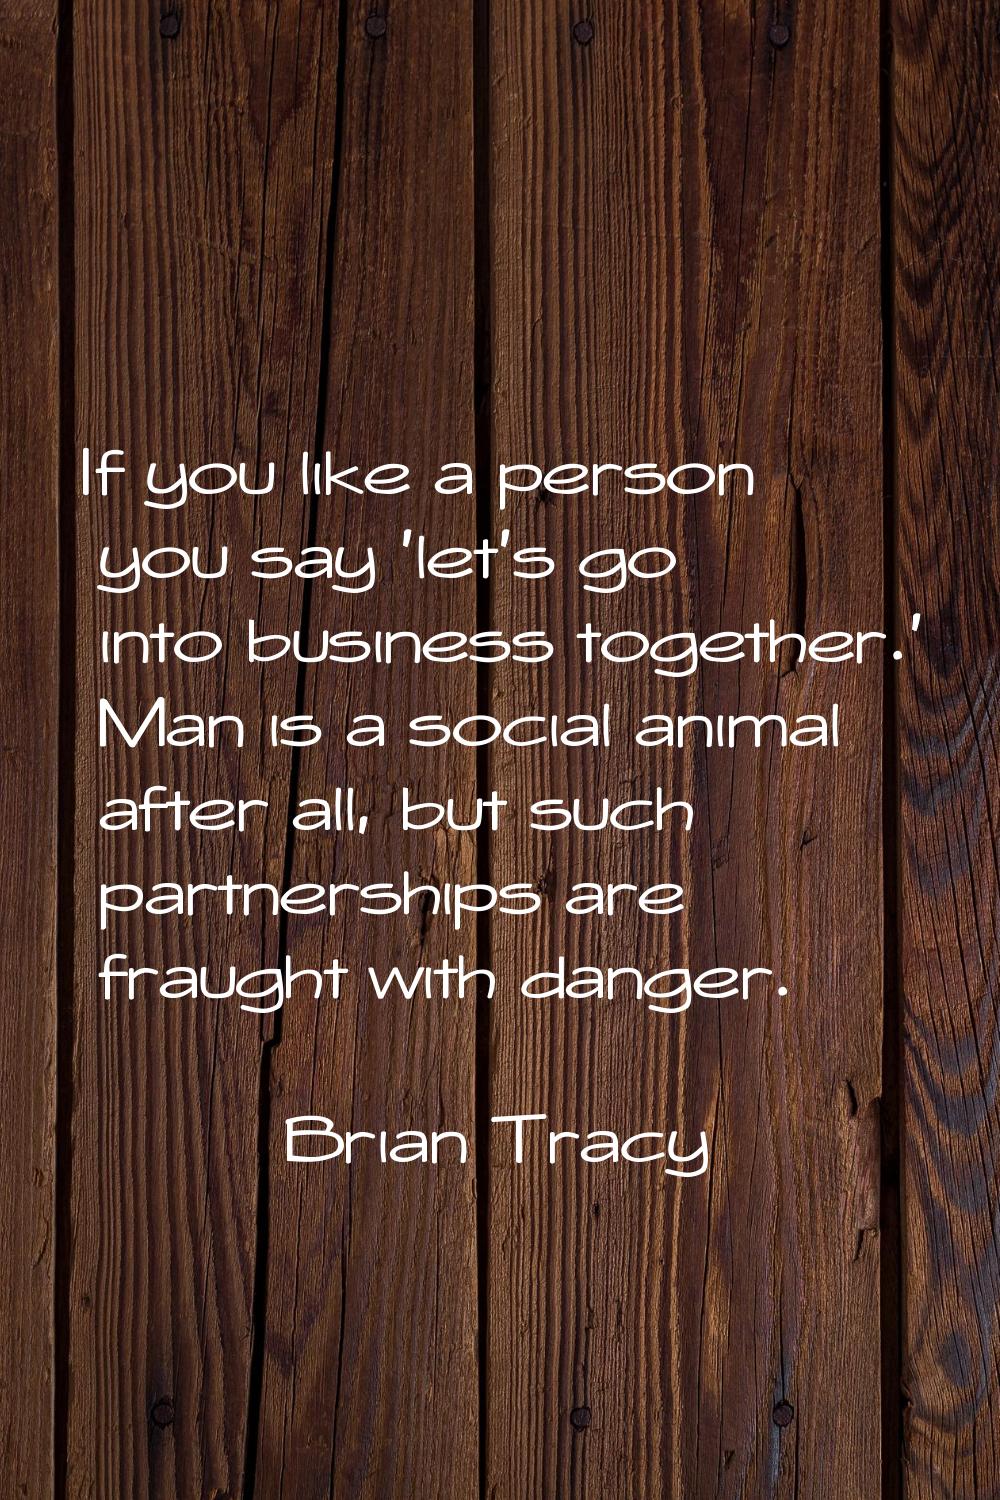 If you like a person you say 'let's go into business together.' Man is a social animal after all, b